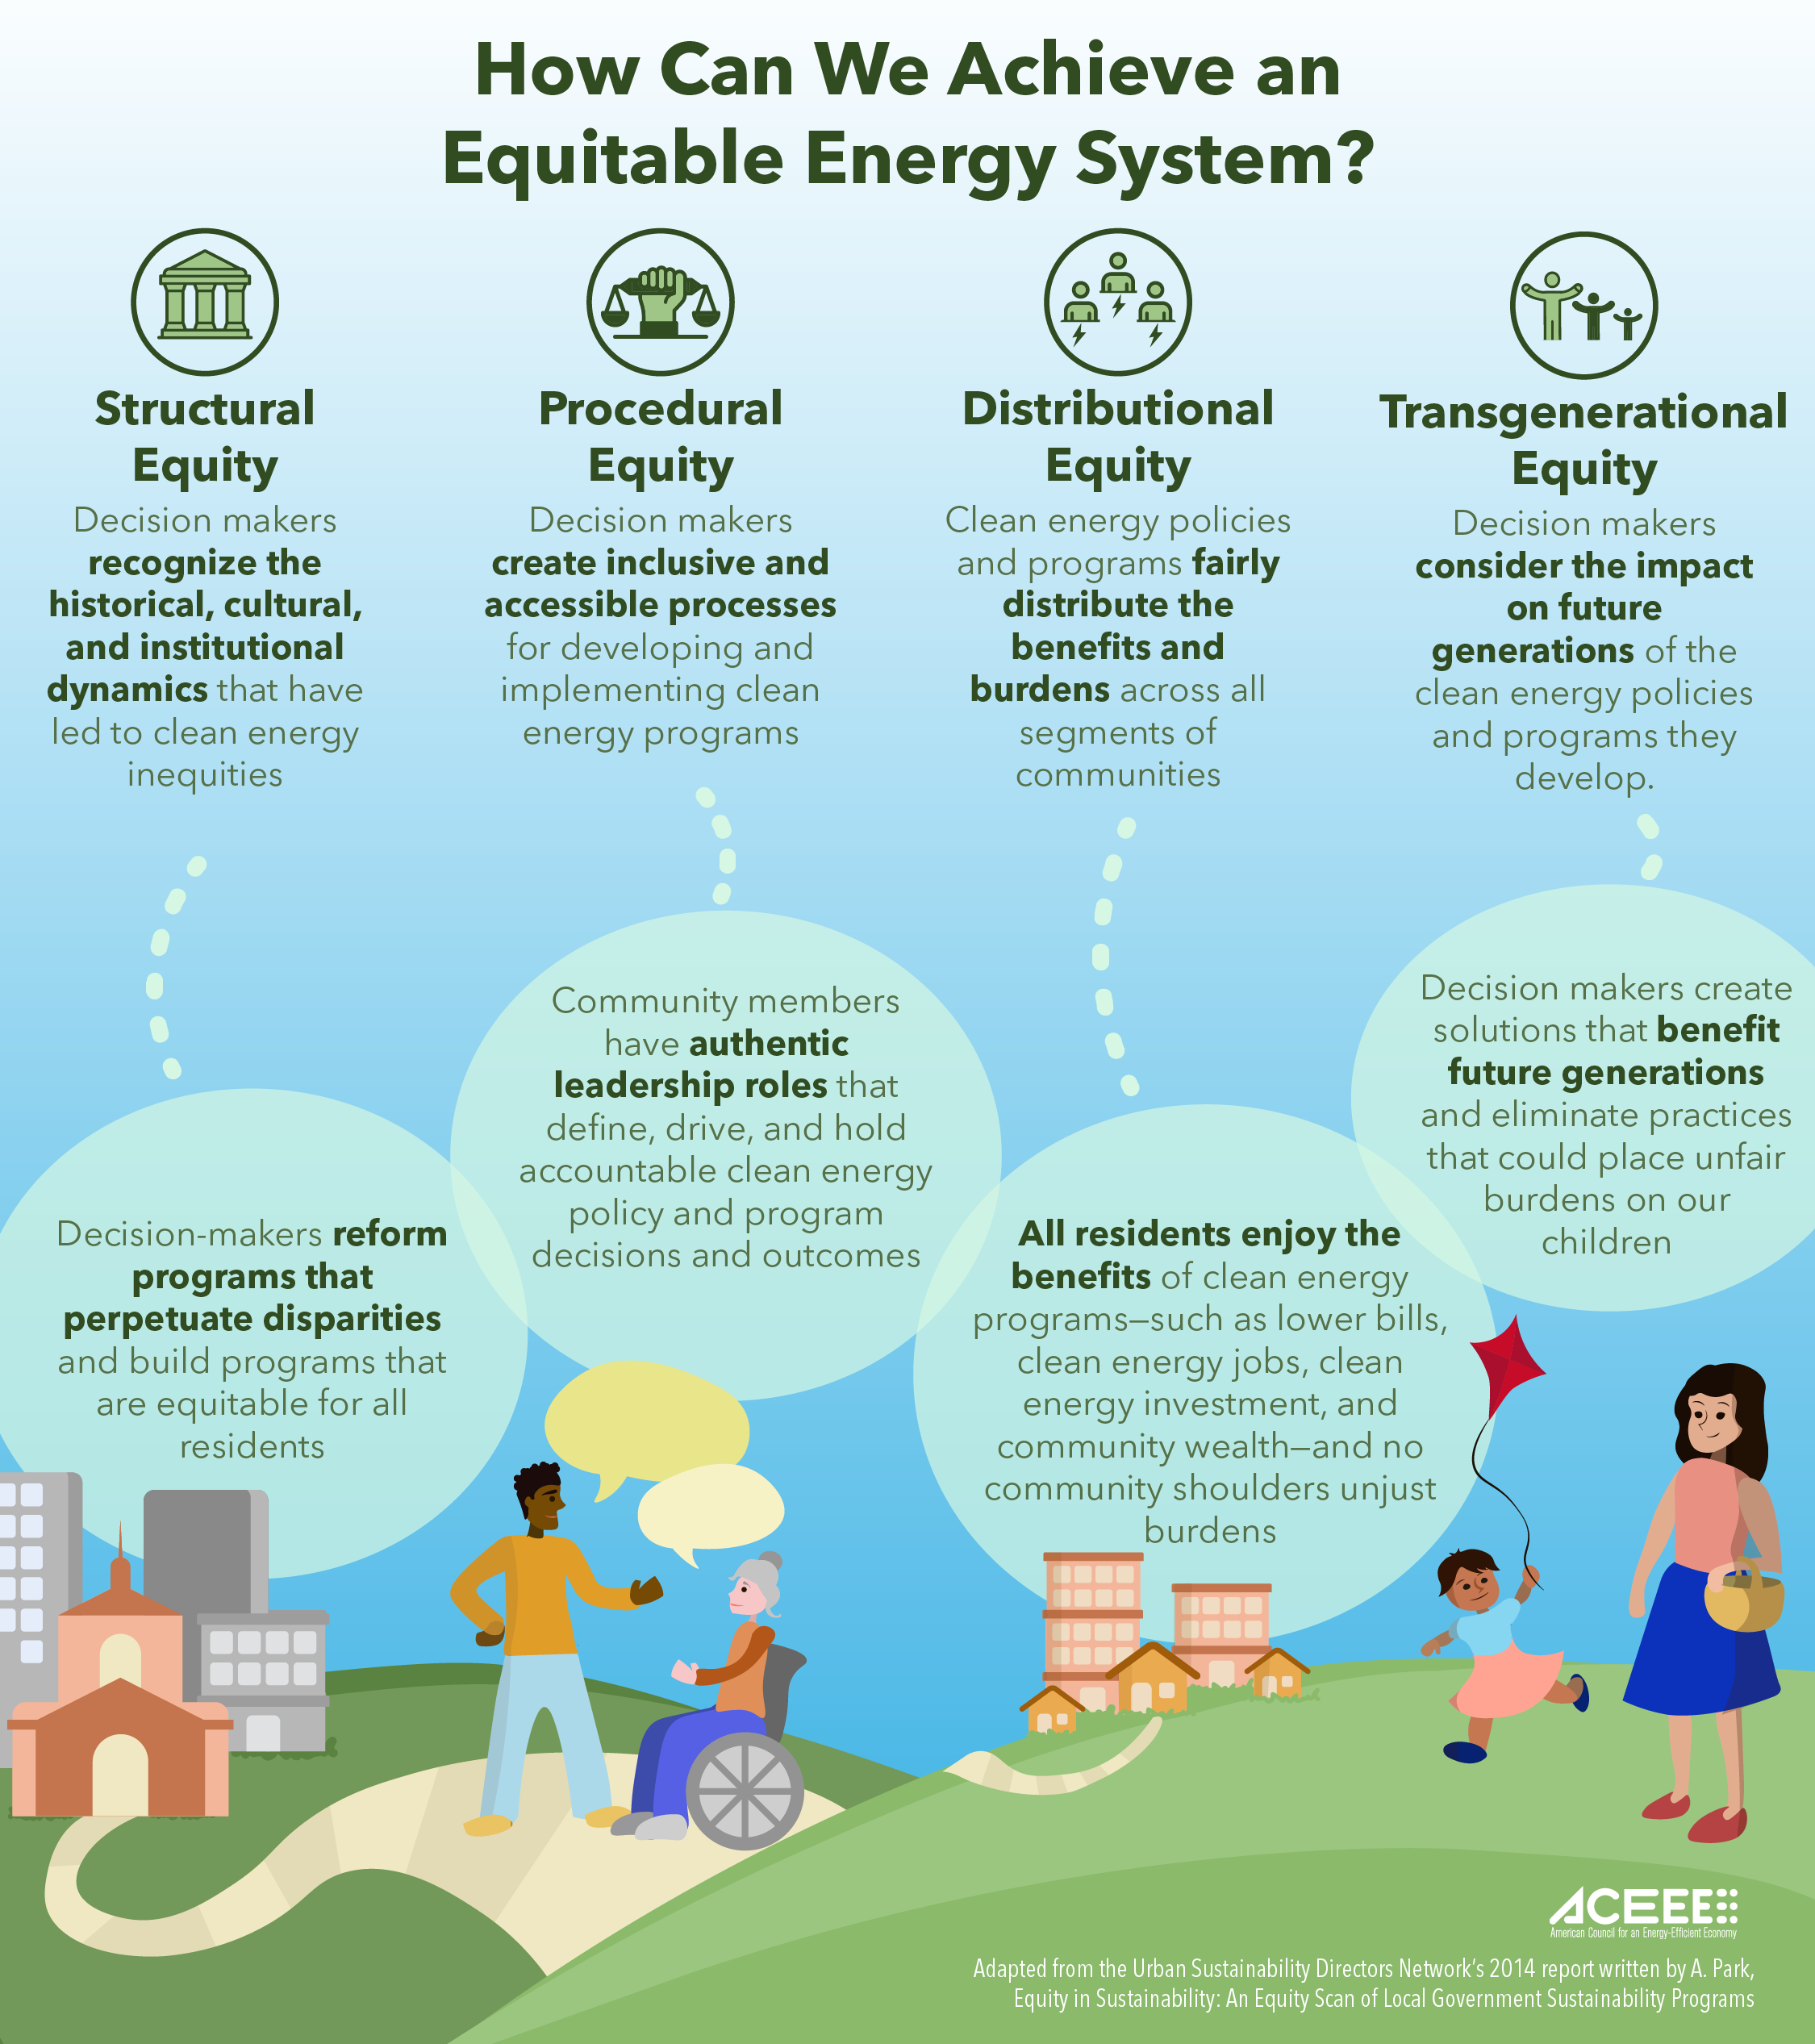 Image of the different types of energy equity - structural, procedural, transformational, and distributional equity